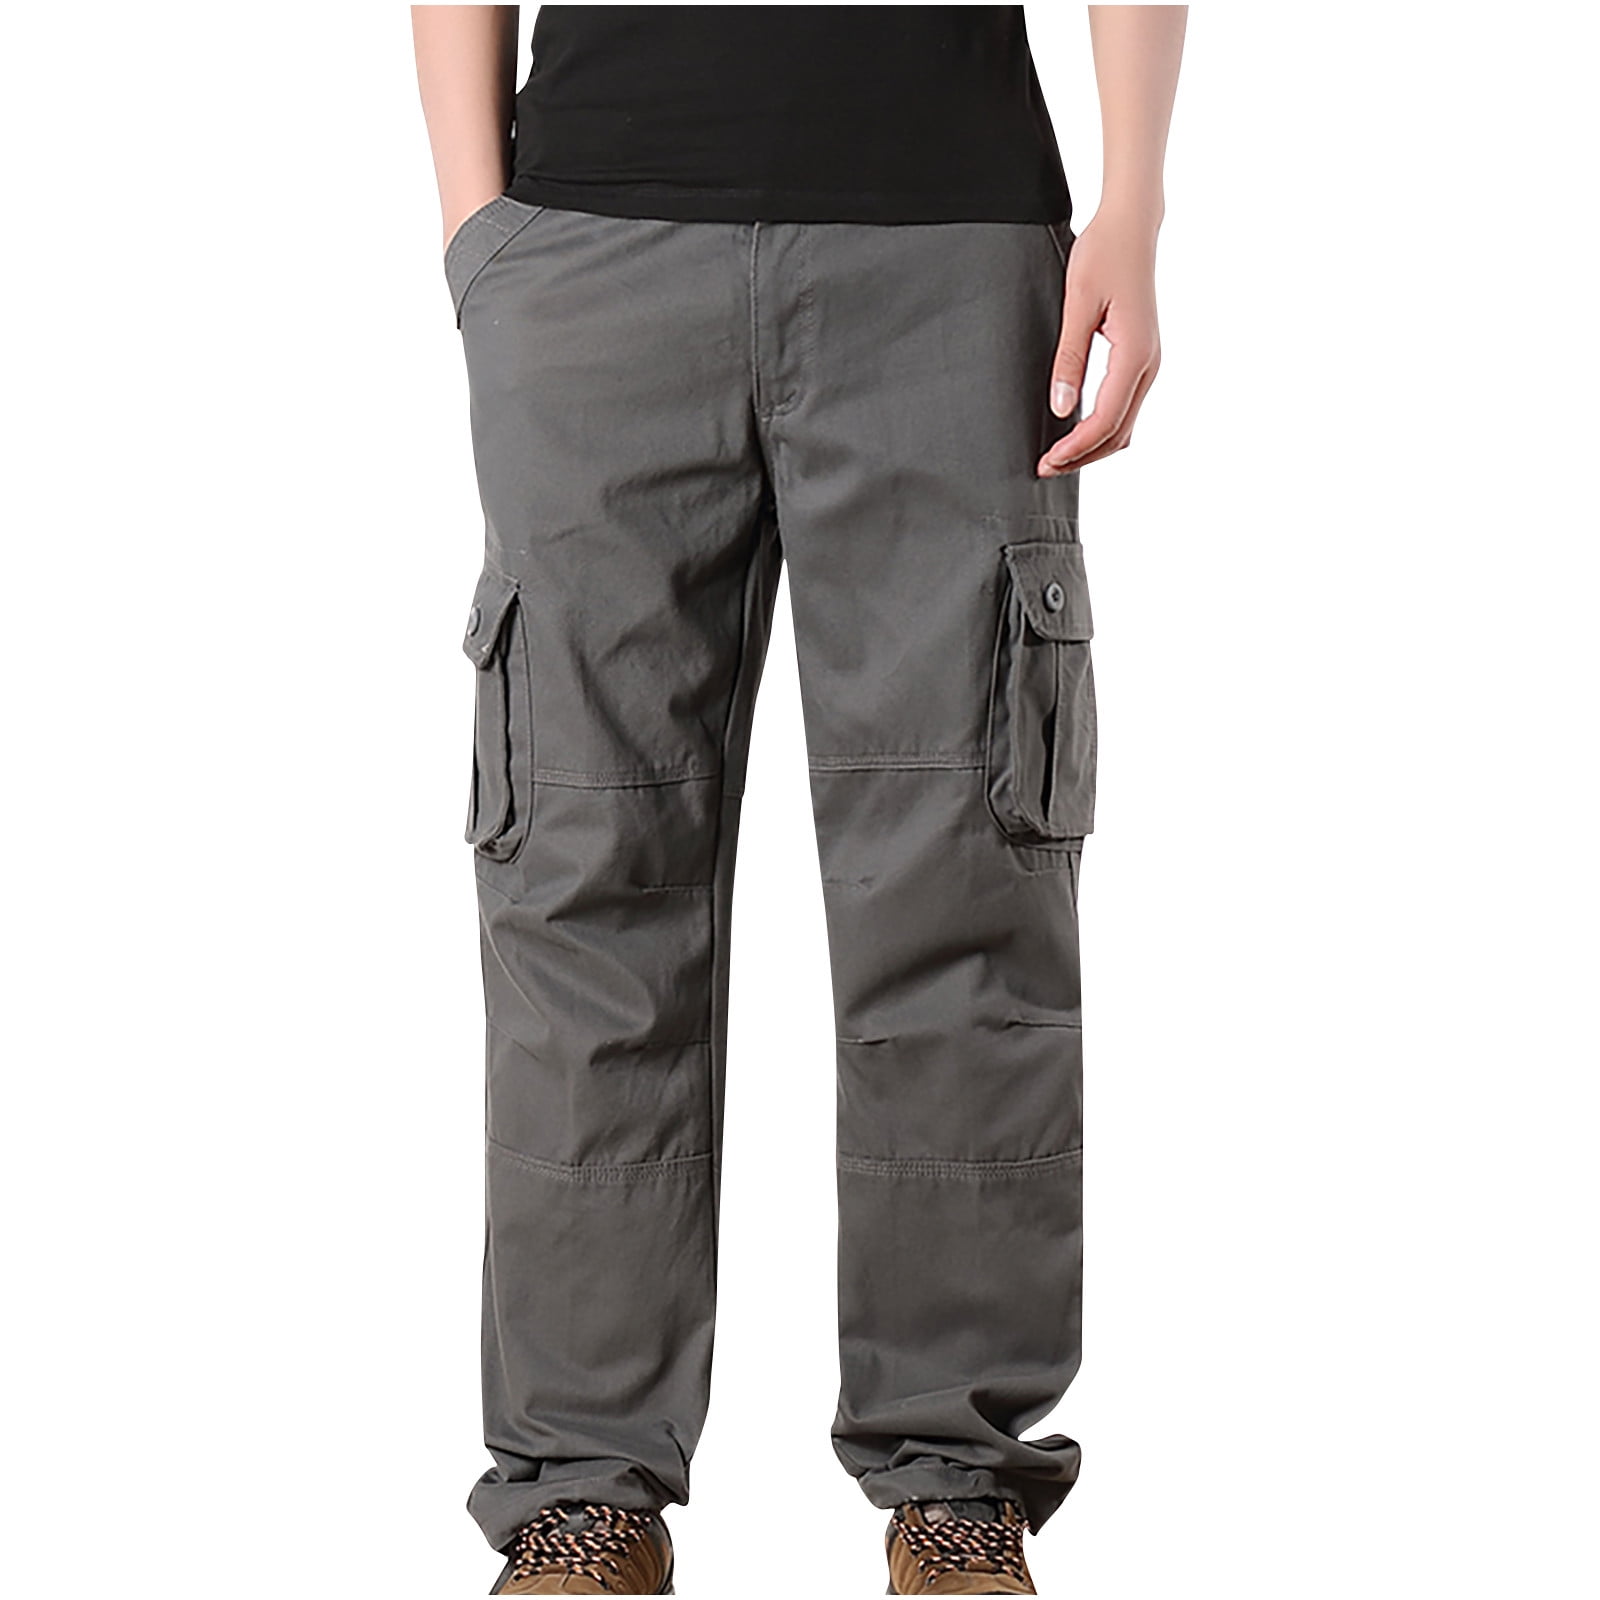 Men's Outdoor Tactical Pants Travel Hiking Fishing Cargo Pants Relaxed Fit  Work Pants Casual Big and Tall Trousers